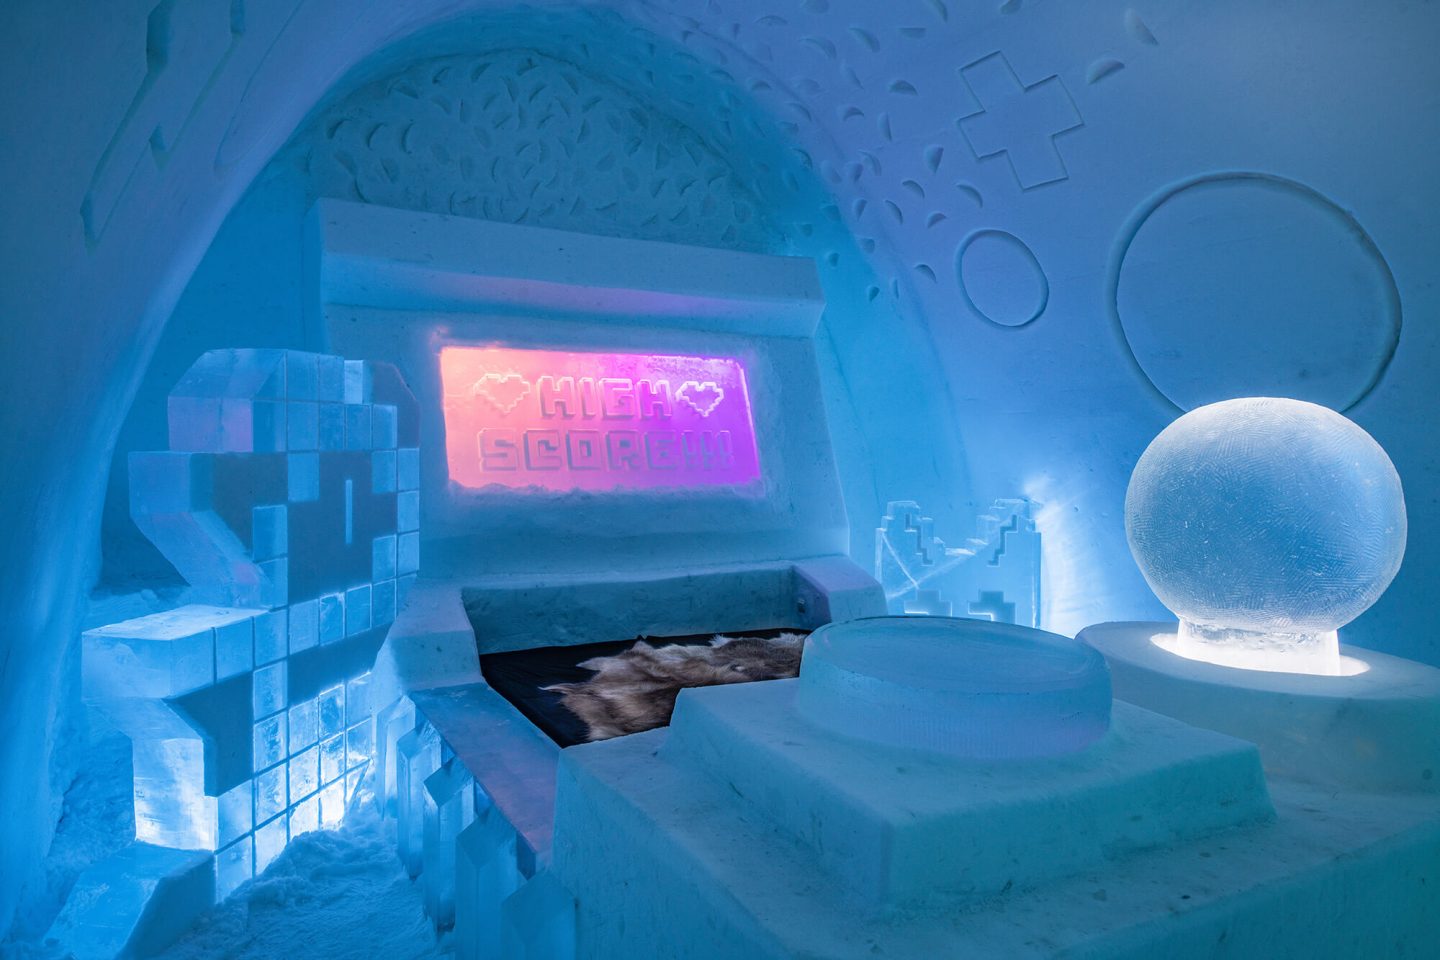 icehotel33 art suite high score by sonia chow and huschang pourian ak